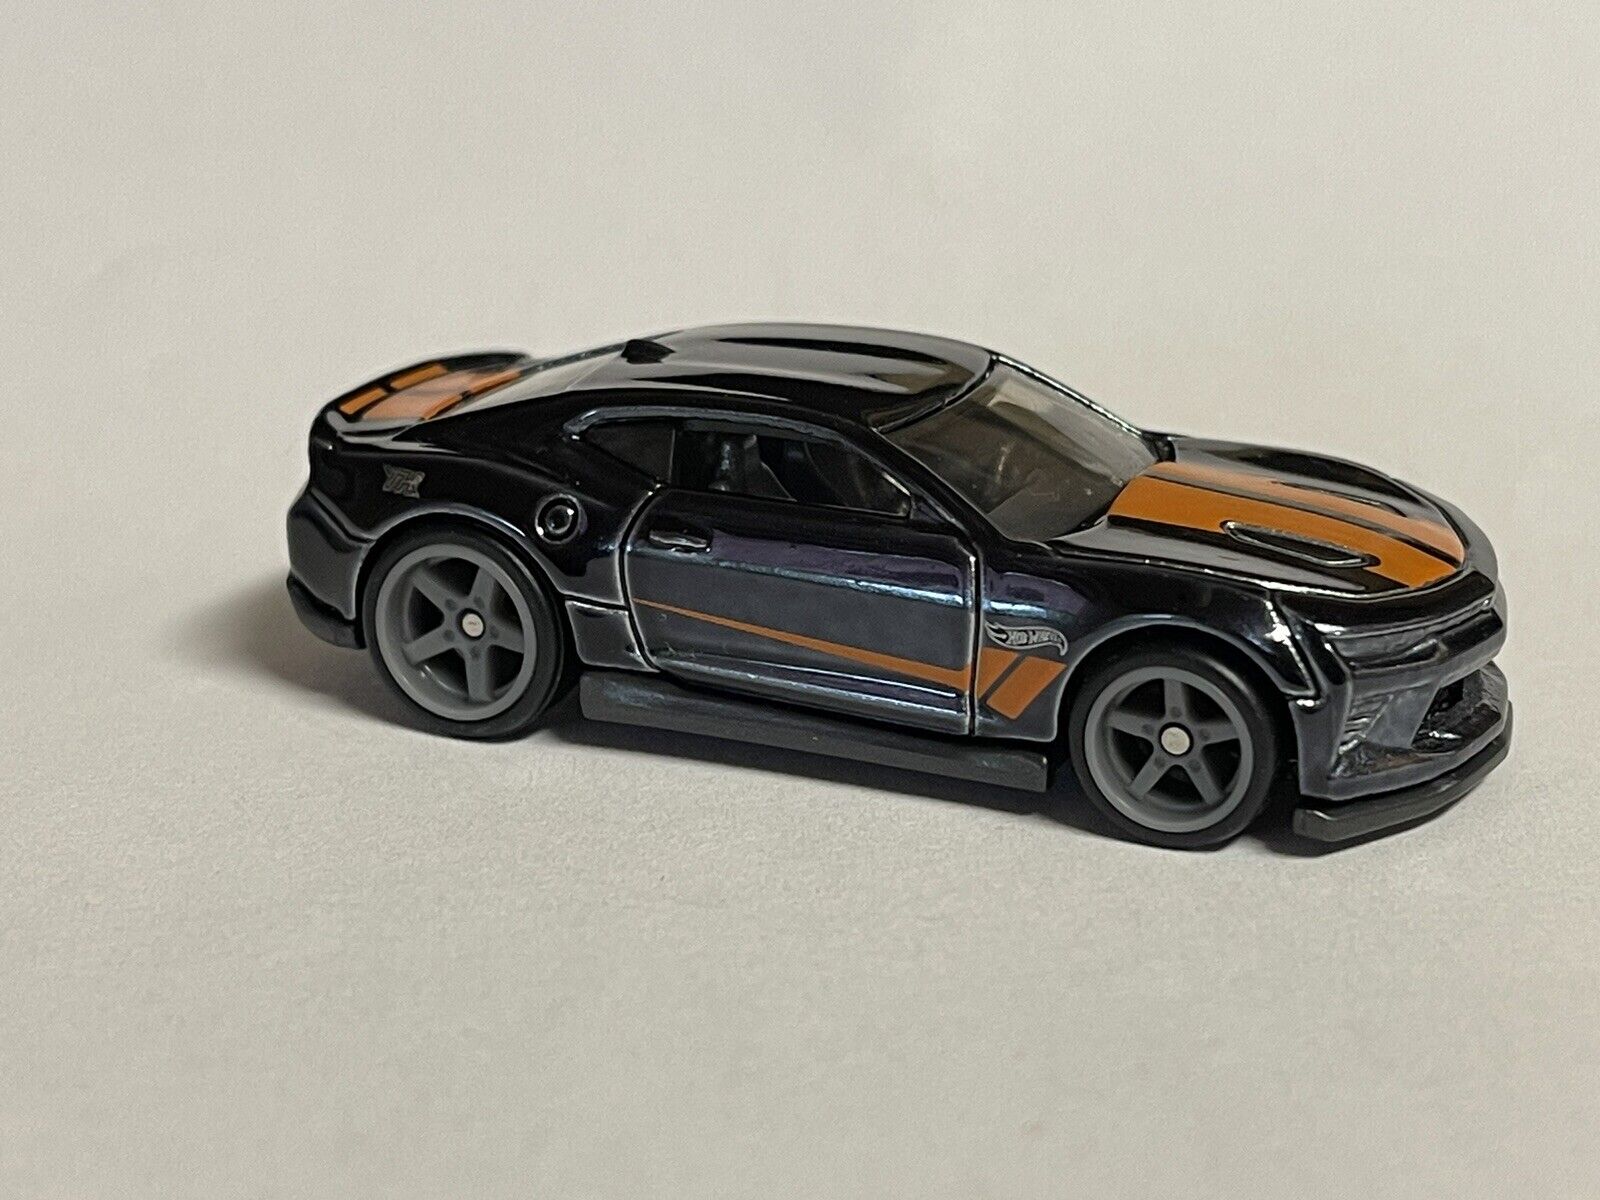 Inside the 2023 Hot Wheels Case B Here Comes the Second Super Treasure